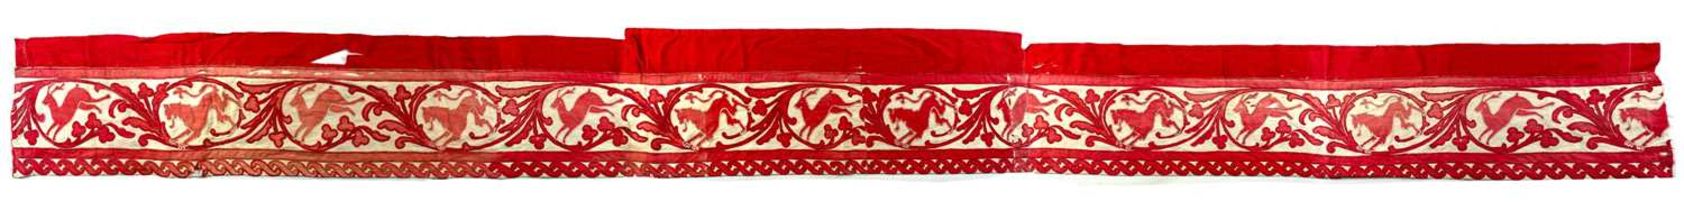 Appliqued valance of red & white silk laid upon red cotton